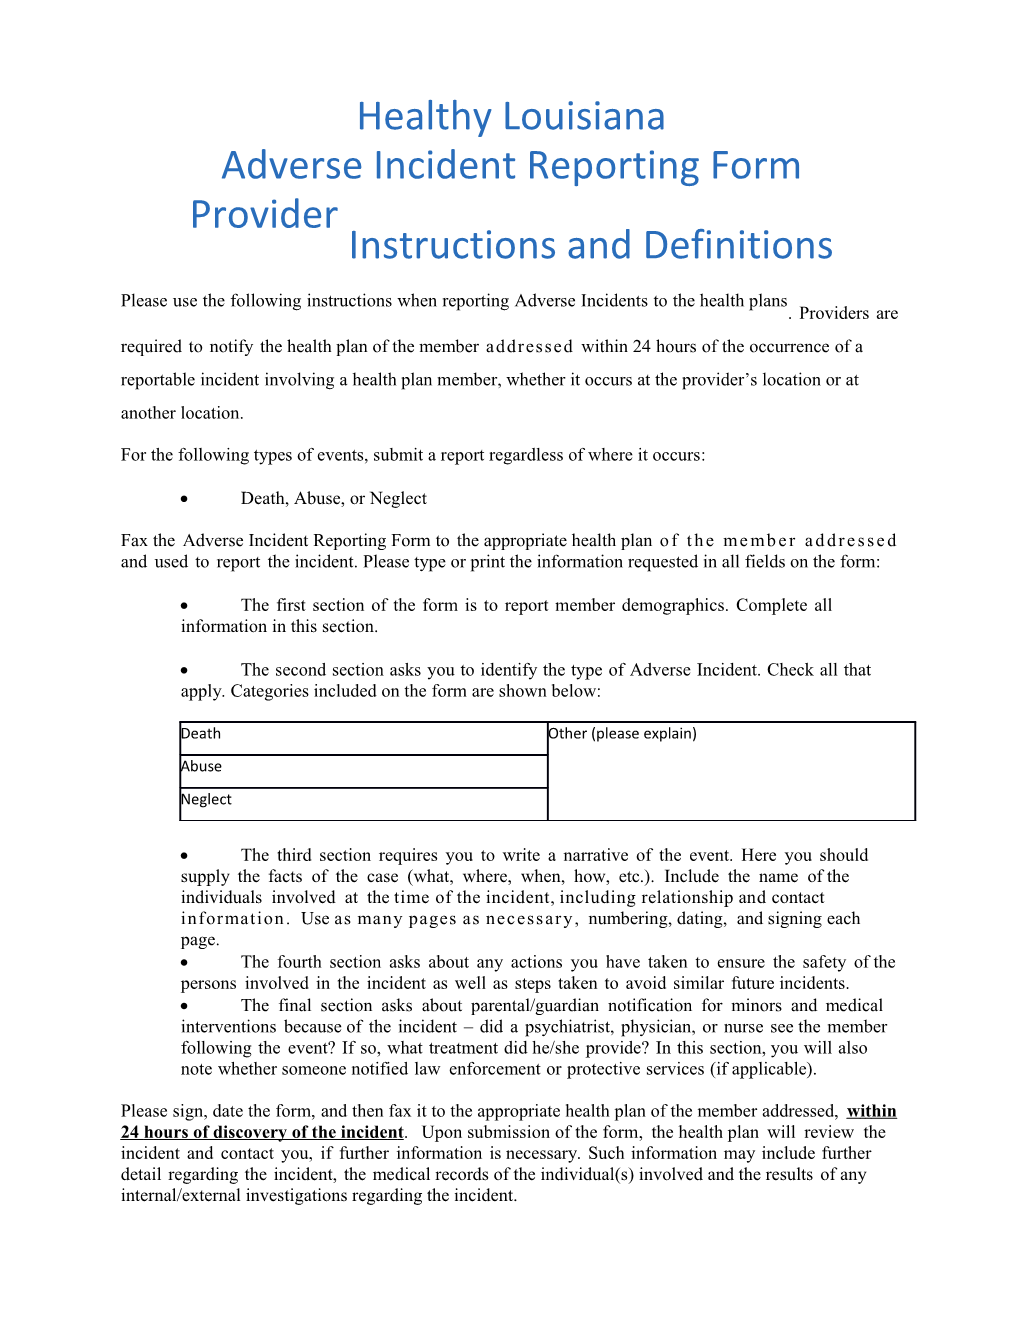 326 Healthy Louisiana Adverse Incident Reporting Form Provider Instructions and Definitions